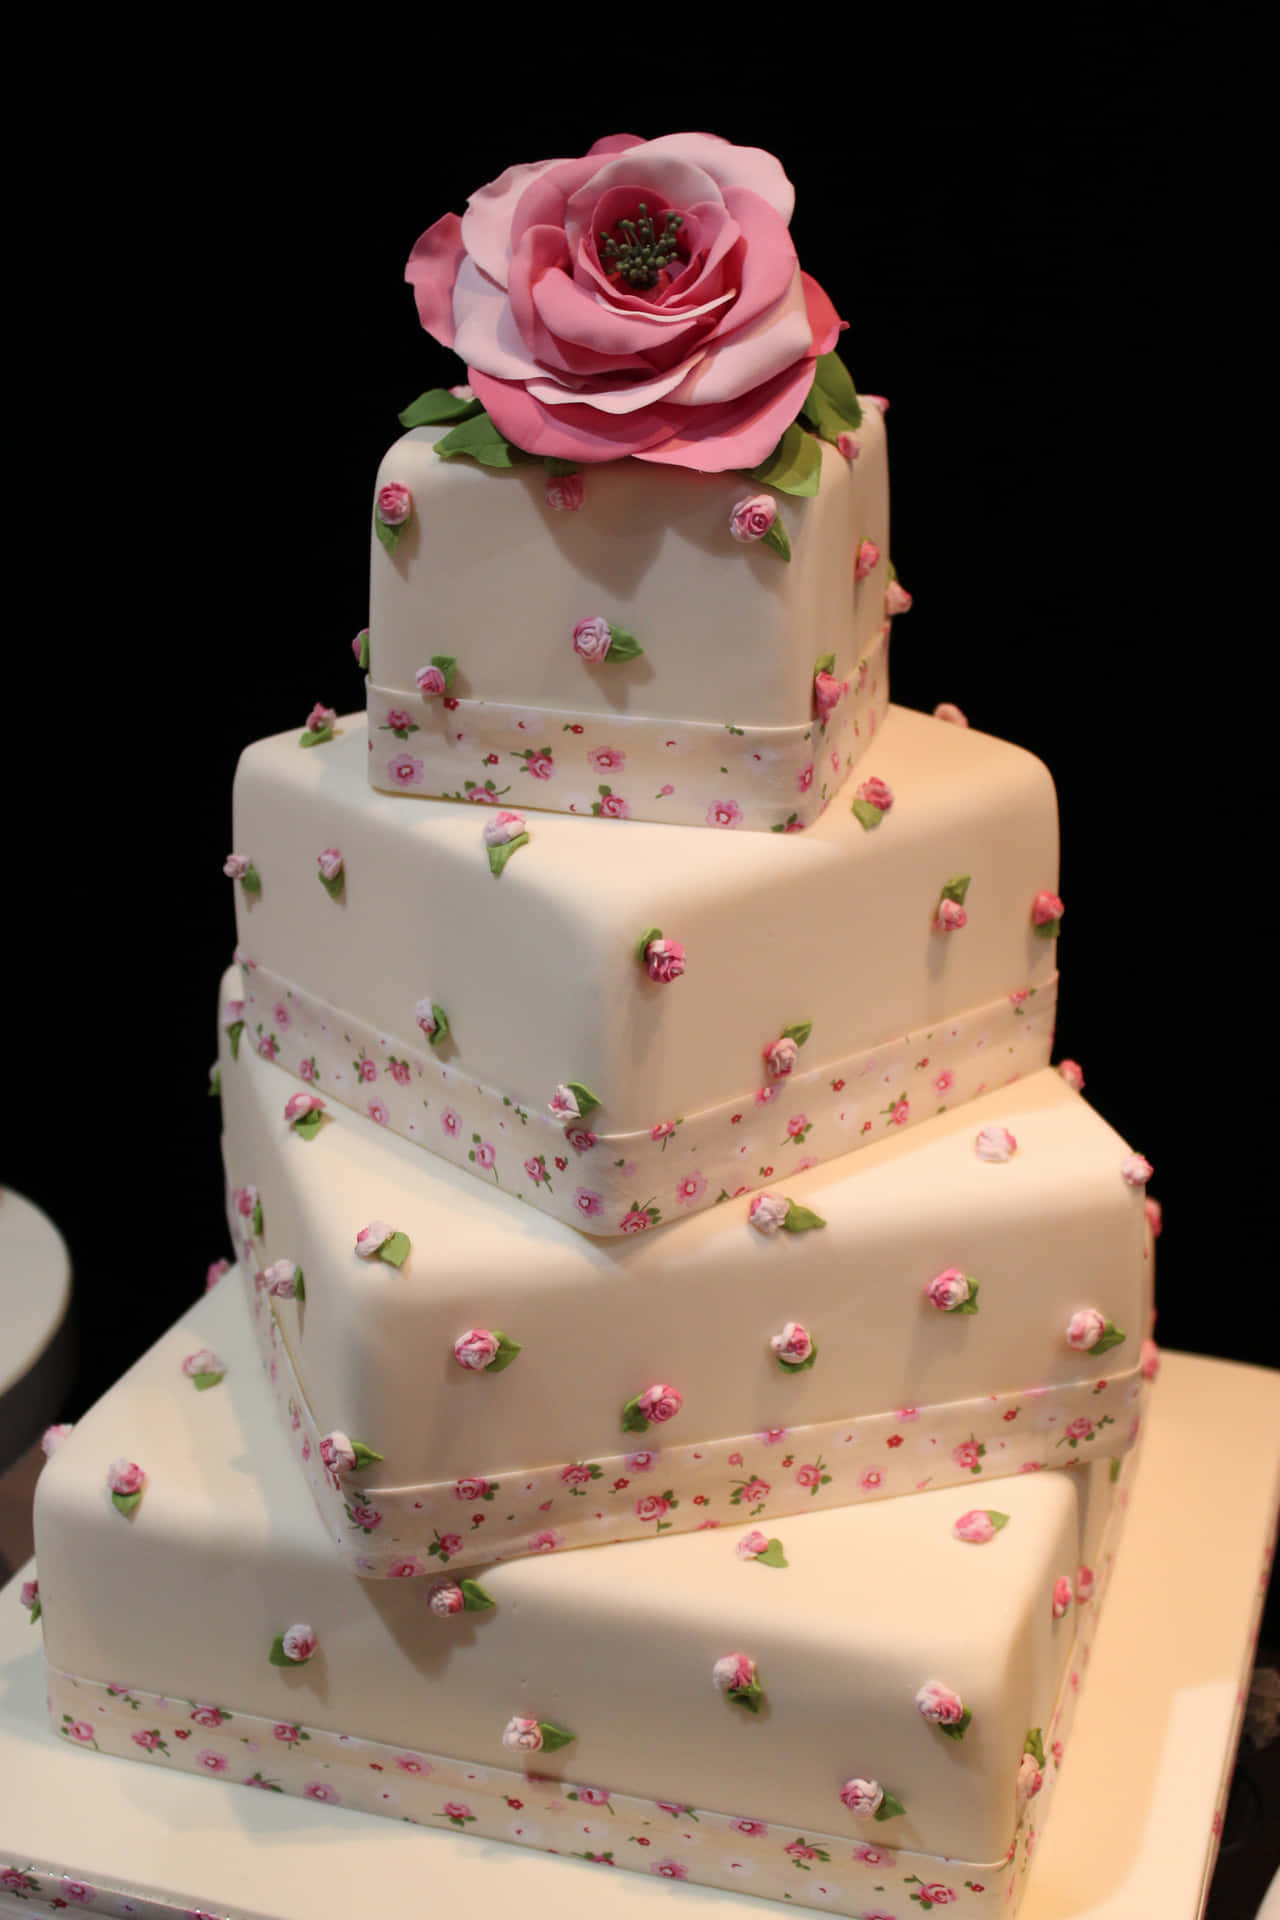 A White Cake With Pink Roses